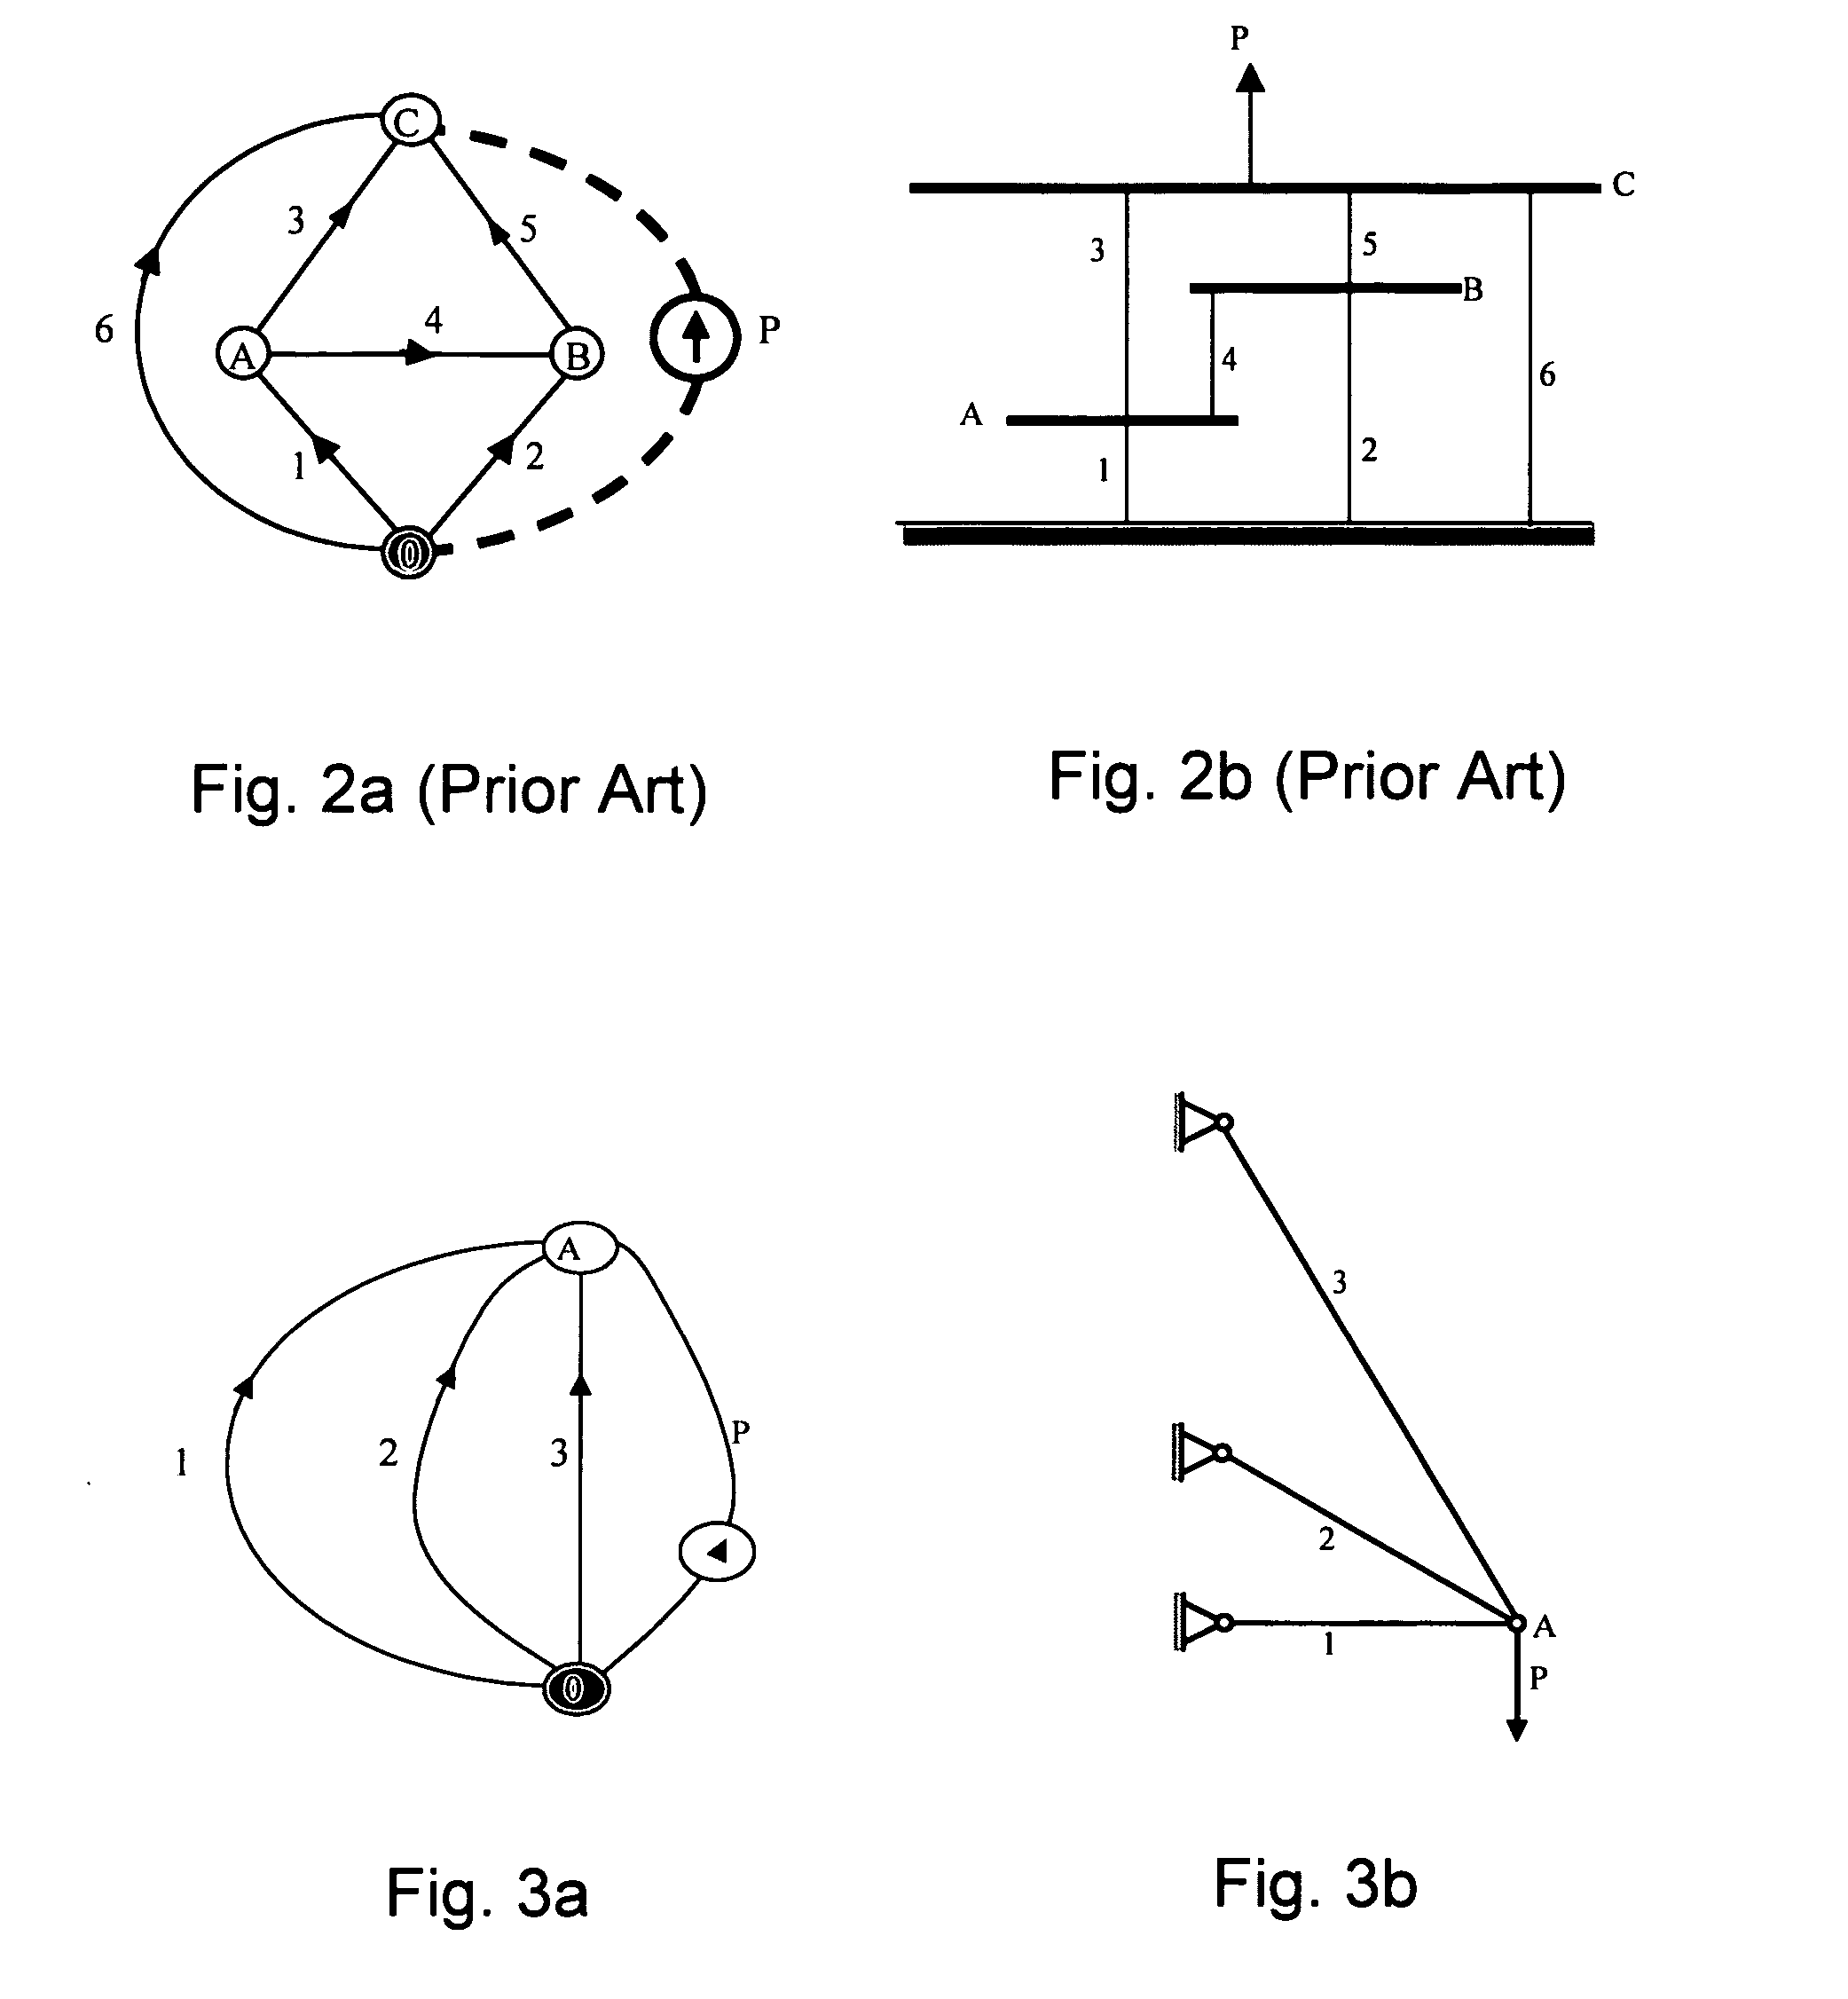 Method and Apparatus for Optimizing Multidimensional Systems